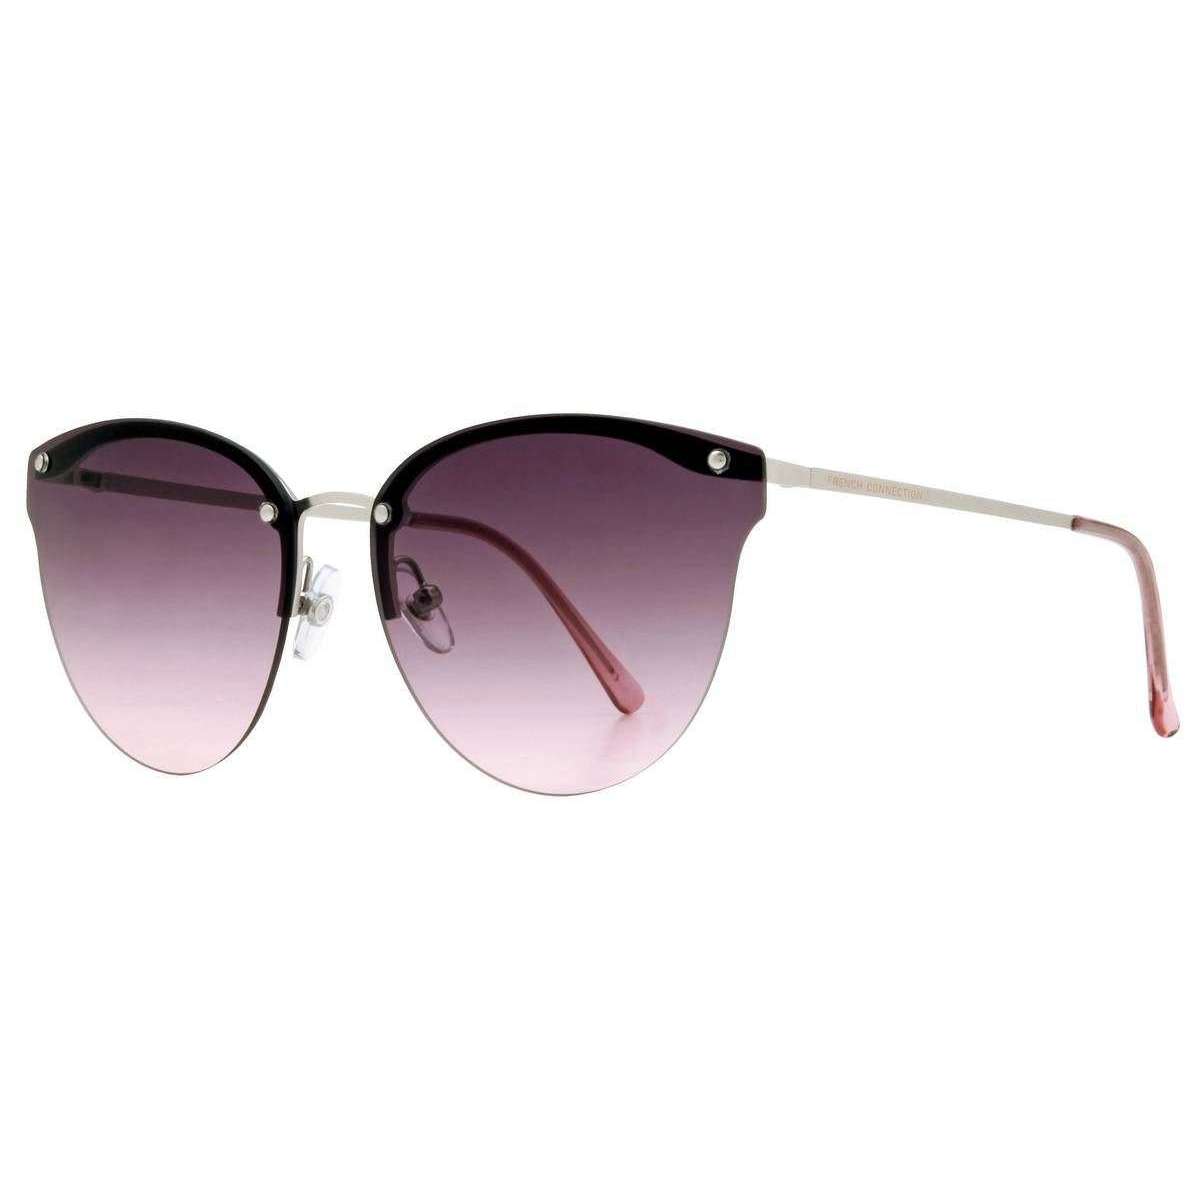 French Connection Preppy Metal Brow Rimless Sunglasses - Pink/Silver